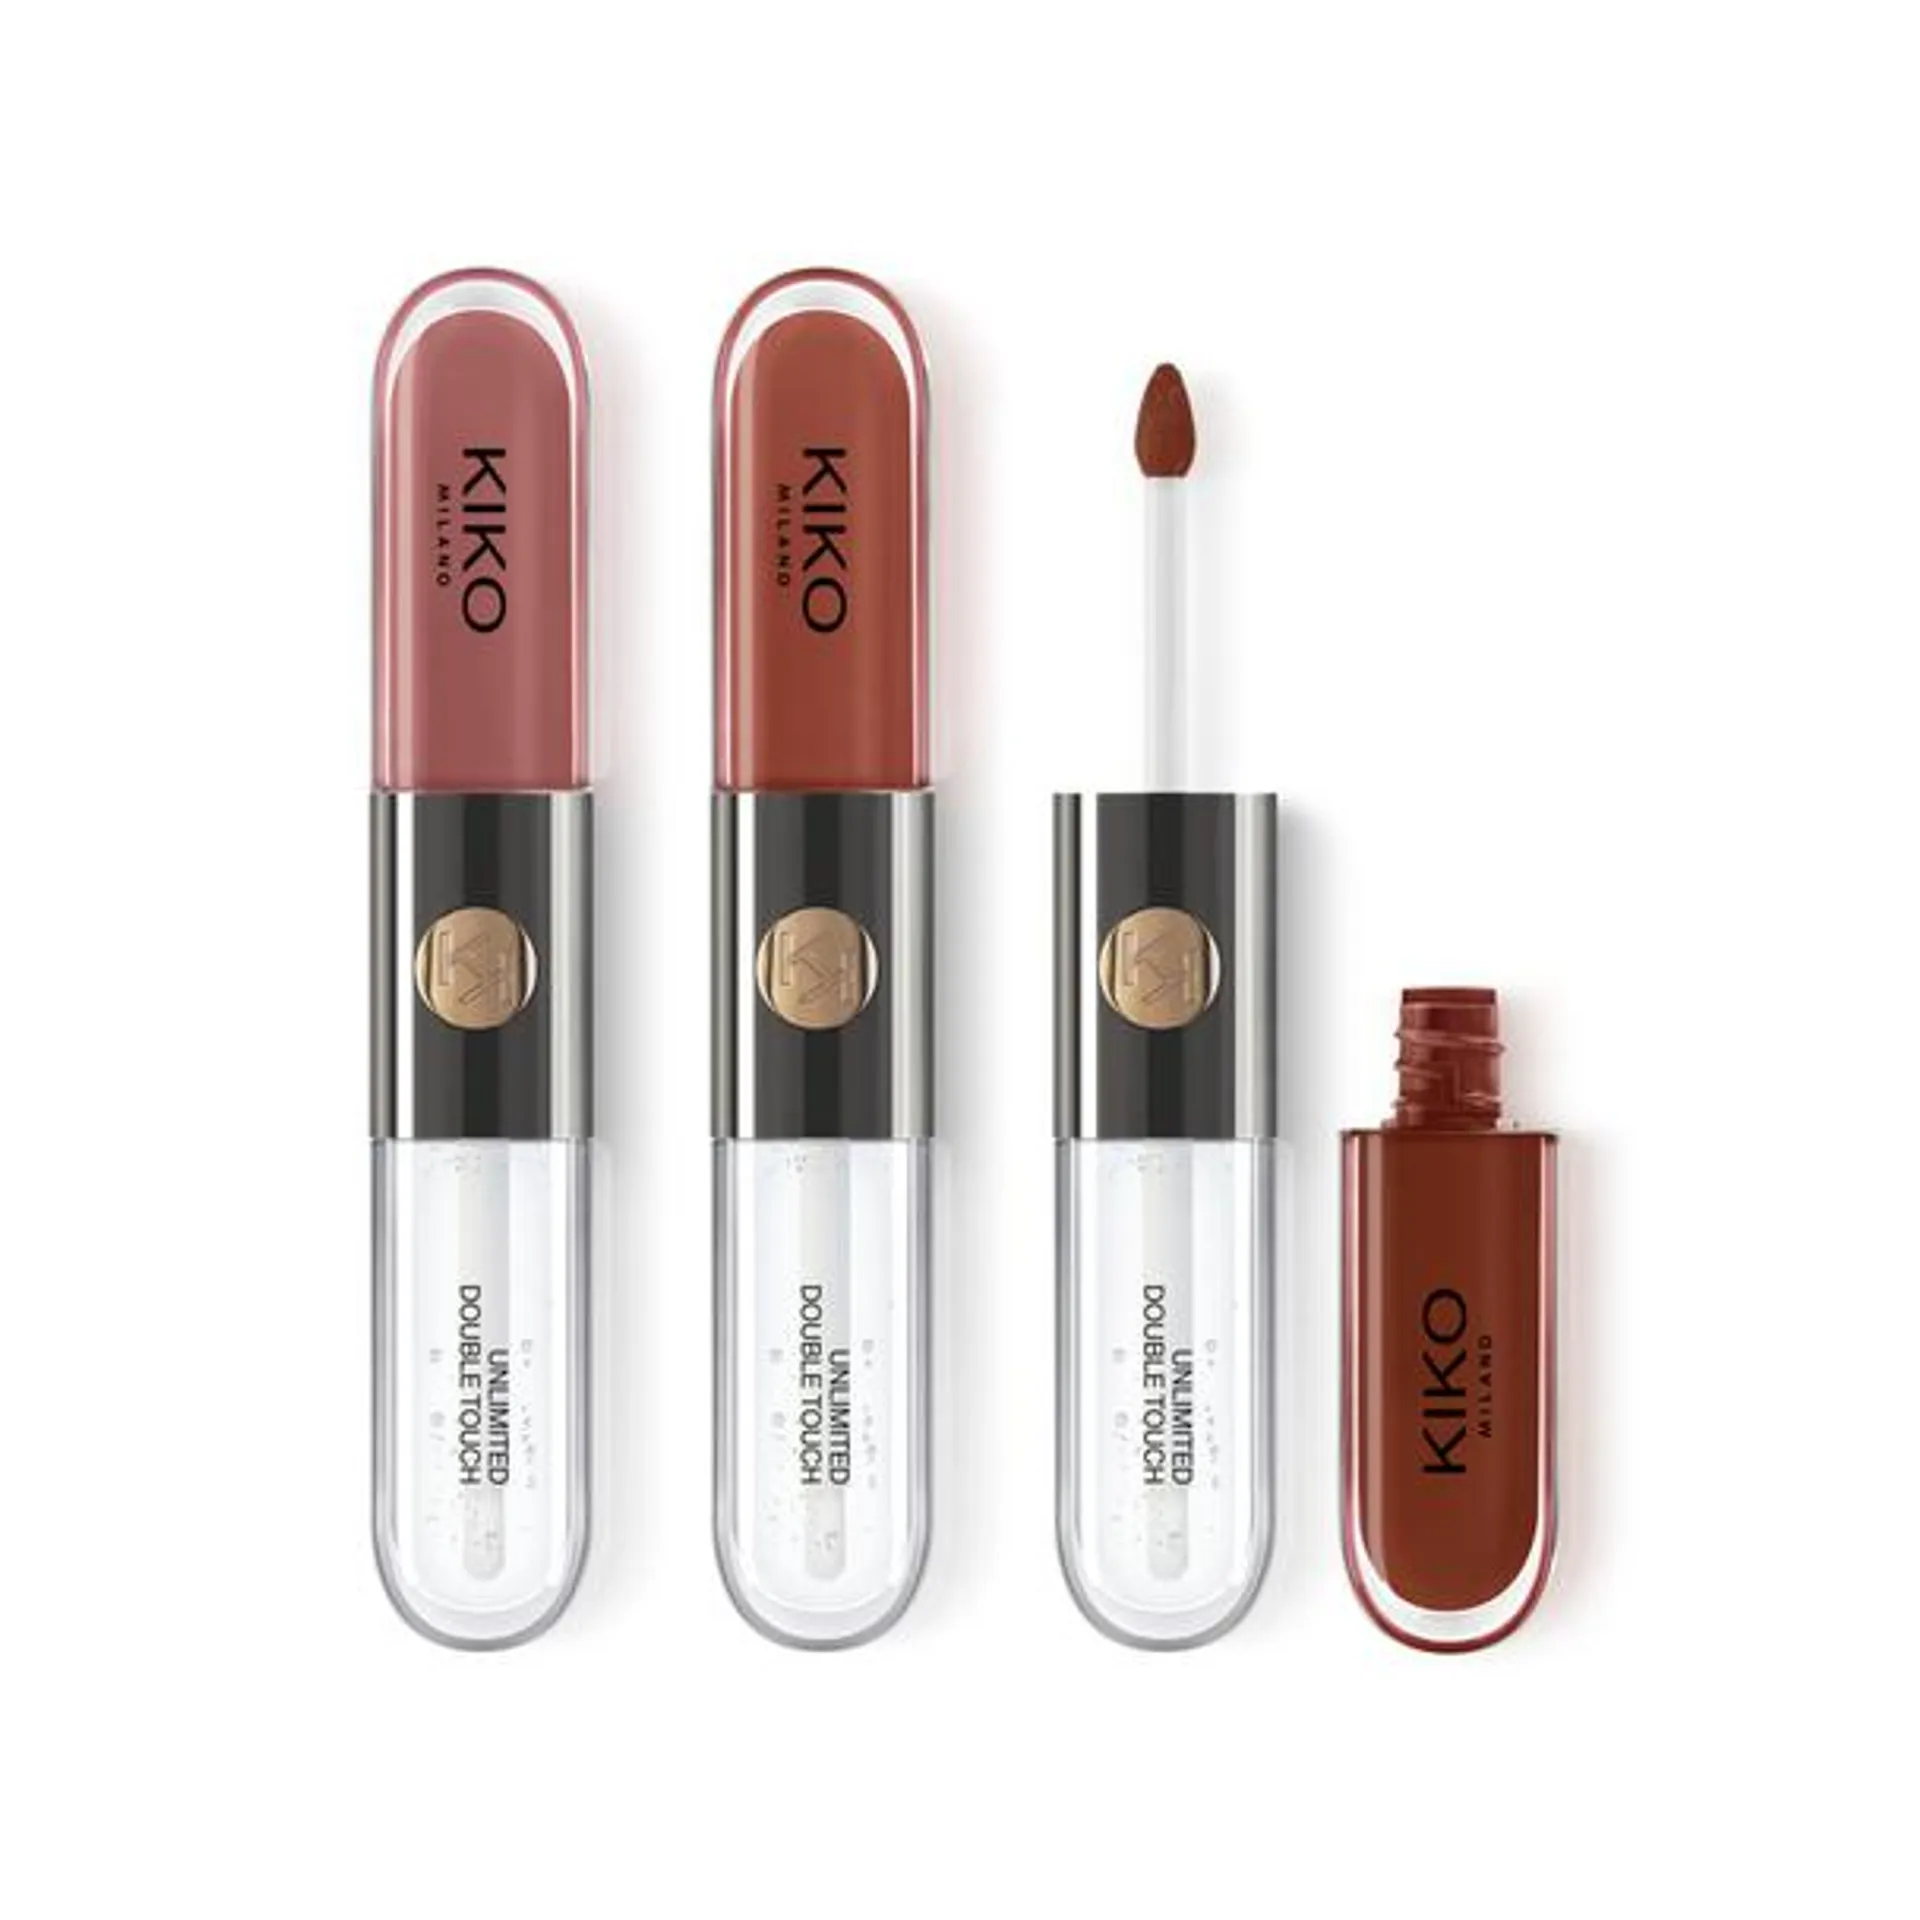 unlimited double touch lipstick kit